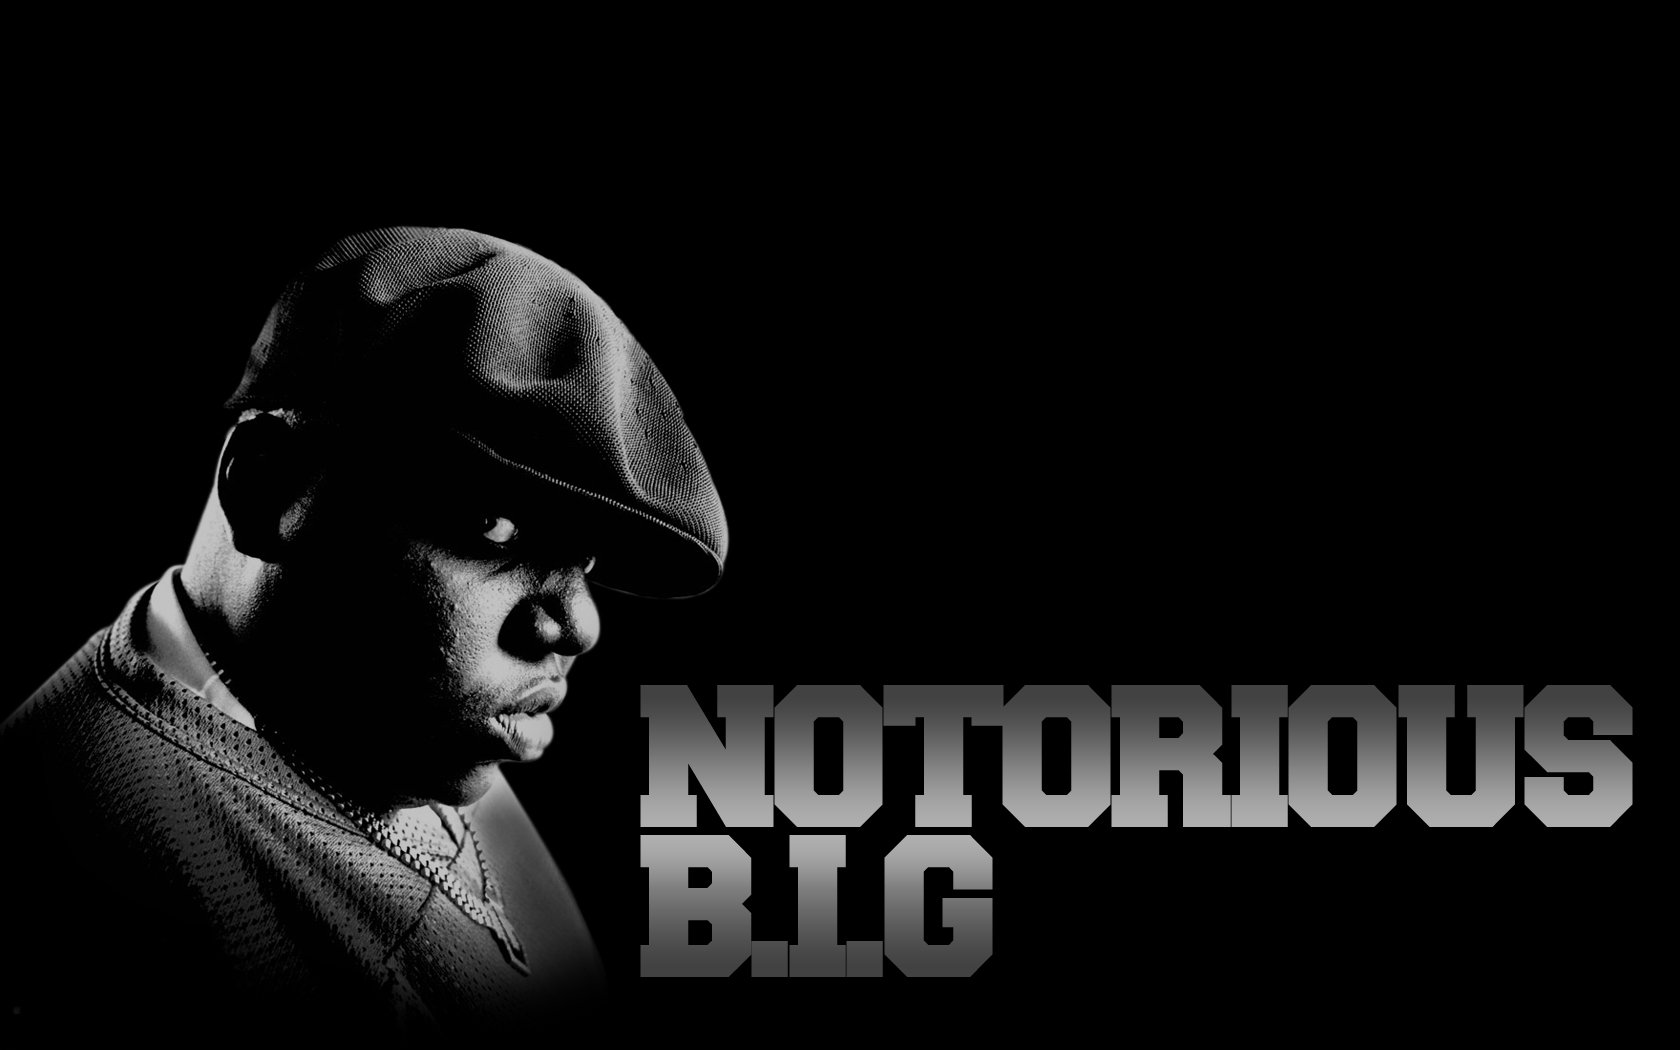 The Notorious B.I.G. Wallpaper